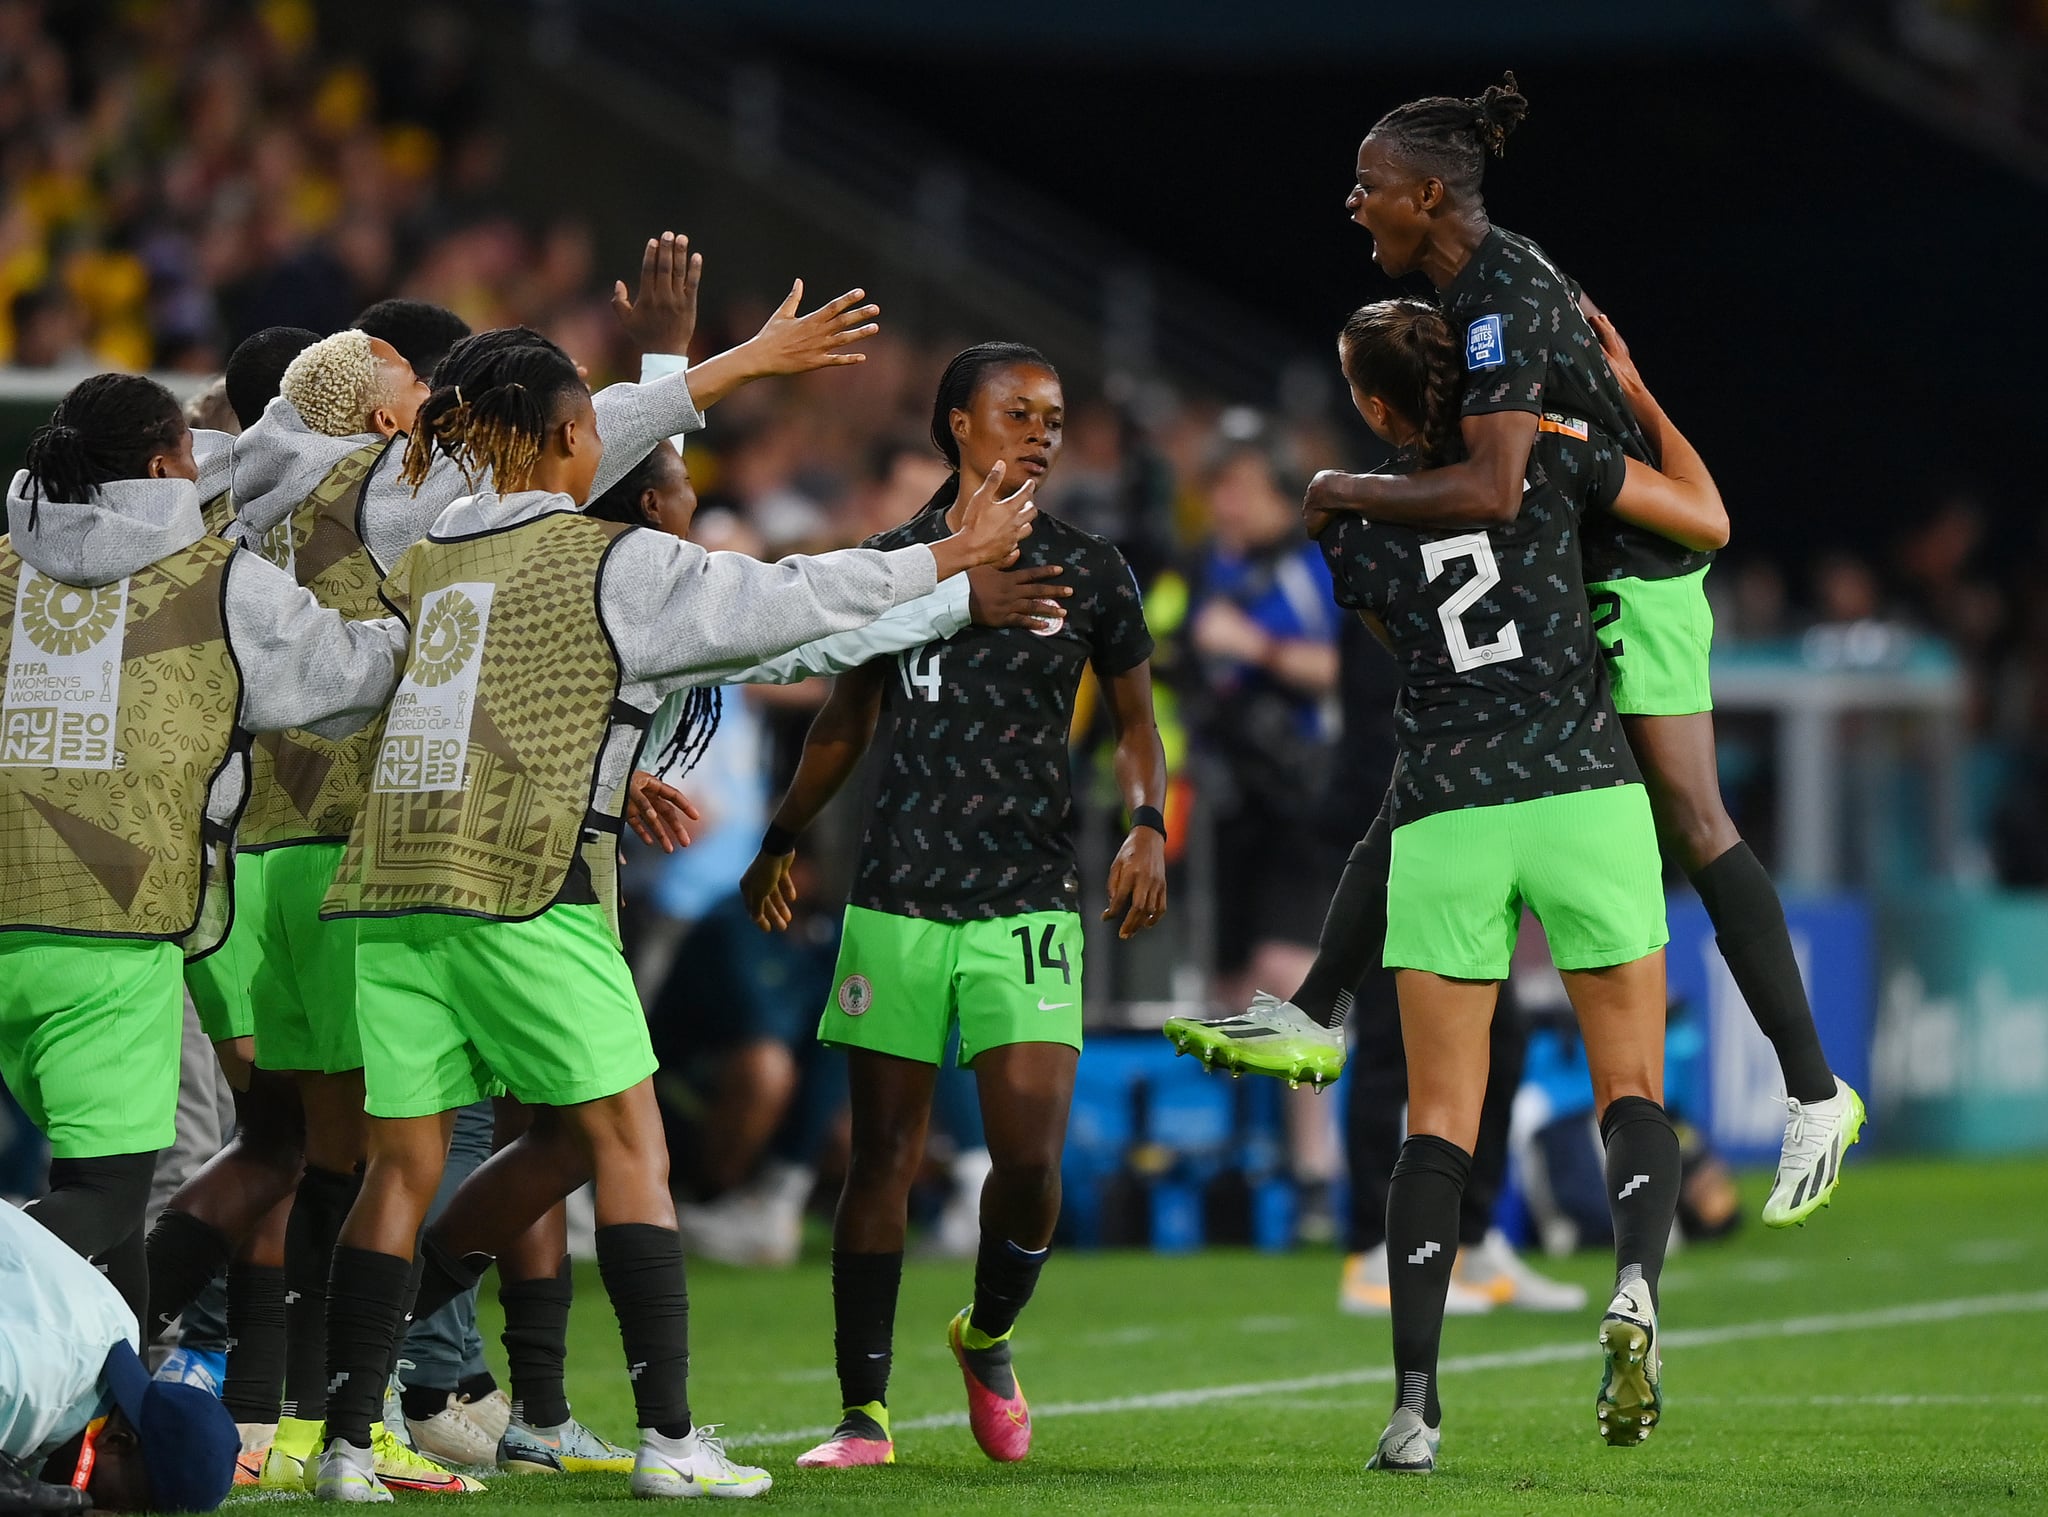 BRISBANE, AUSTRALIA - JULY 27: Uchenna Kanu (1st R) of Nigeria celebrates with teammates after scoring her team's first goal during the FIFA Women's World Cup Australia & New Zealand 2023 Group B match between Australia and Nigeria at Brisbane Stadium on July 27, 2023 in Brisbane / Meaanjin, Australia. (Photo by Justin Setterfield/Getty Images)